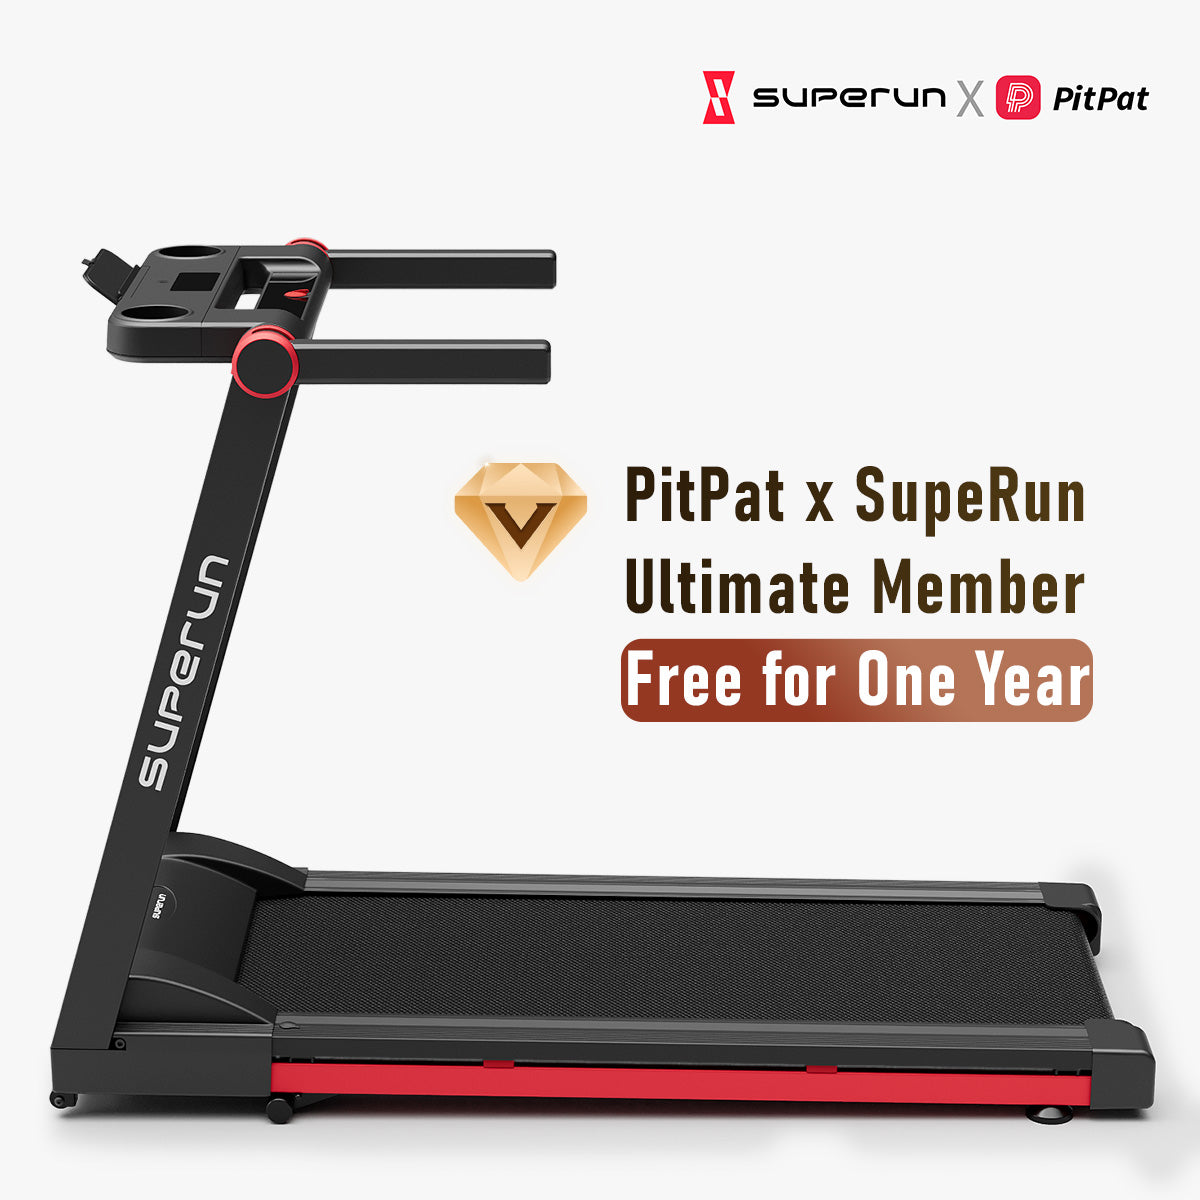 SupeRun® AS02 Inclined Foldable Smart 10 MPH Online Racing Treadmill